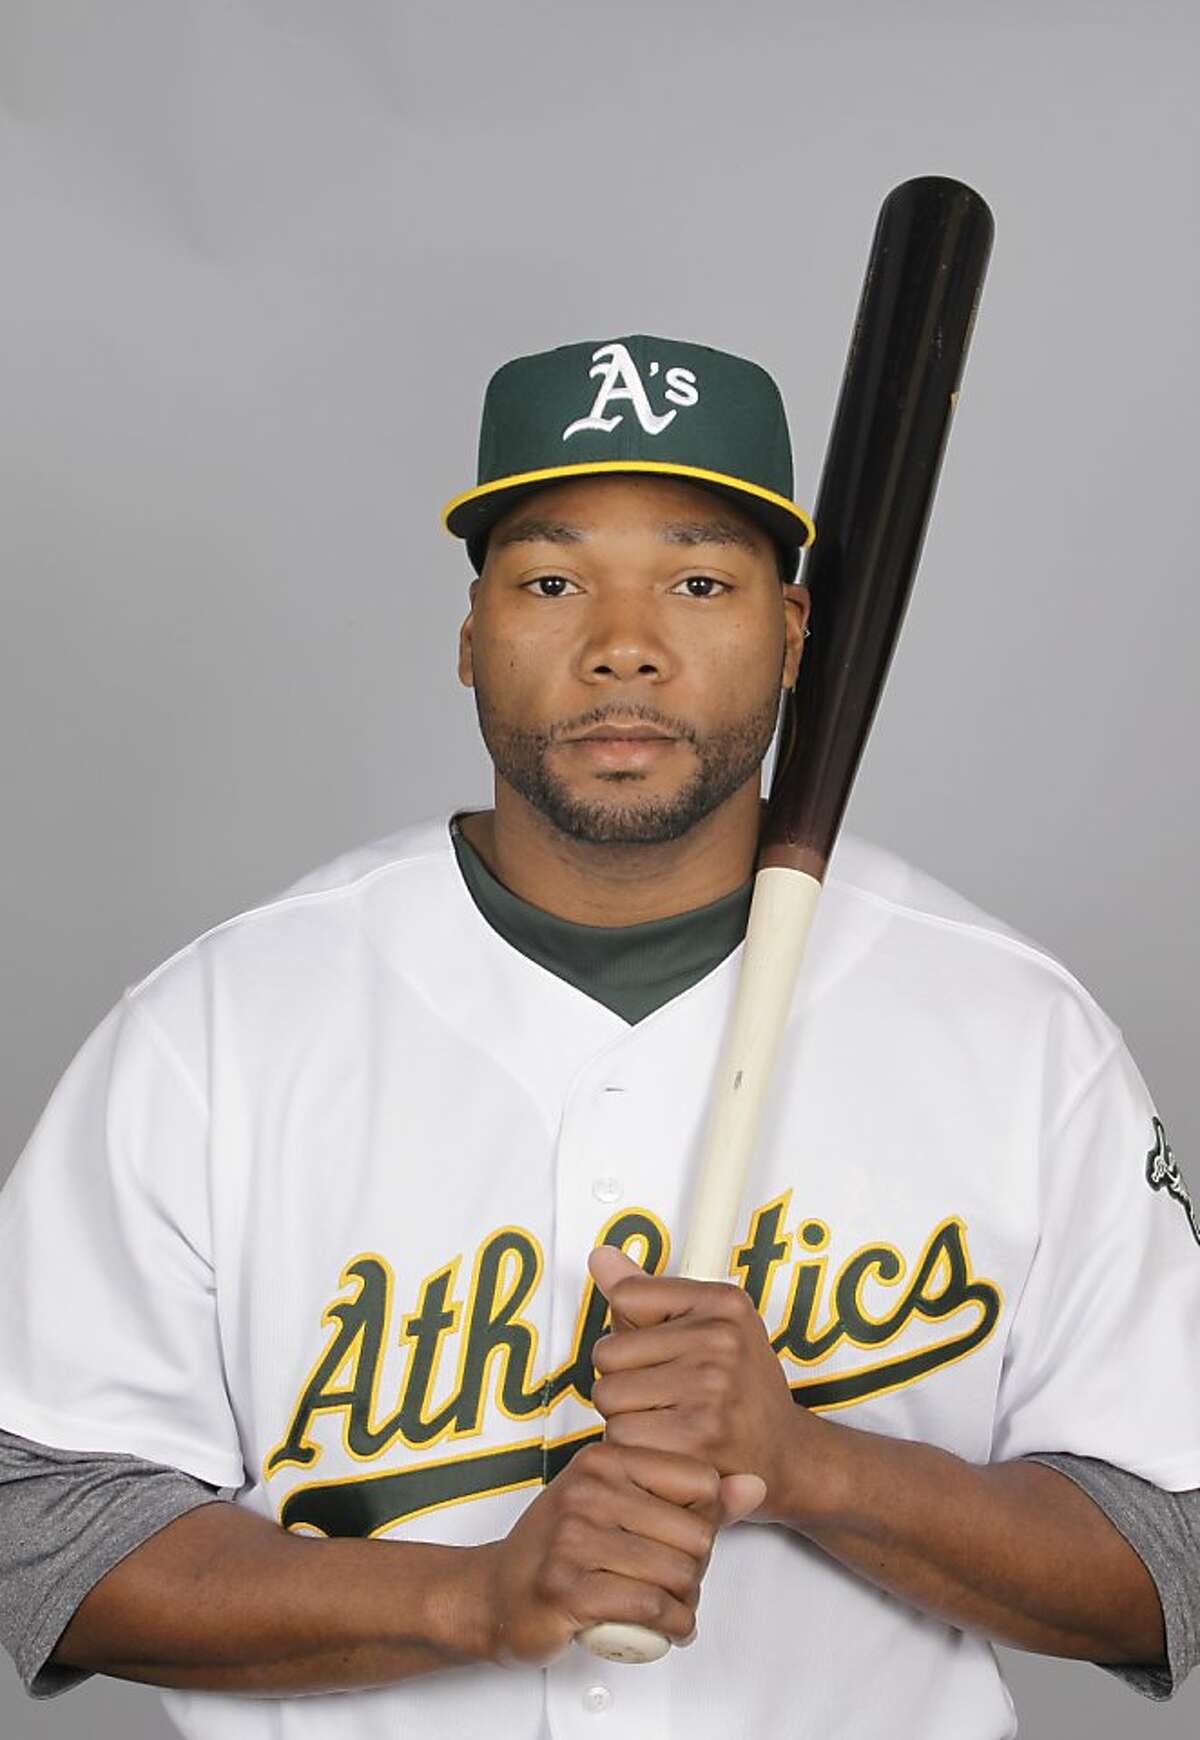 This is a 2012 photo of Brandon Allen of the Oakland Athletics baseball team. This image reflects the Oakland Athletics active roster as of Feb. 27, 2012 when this image was taken. (AP Photo/Darron Cummings)